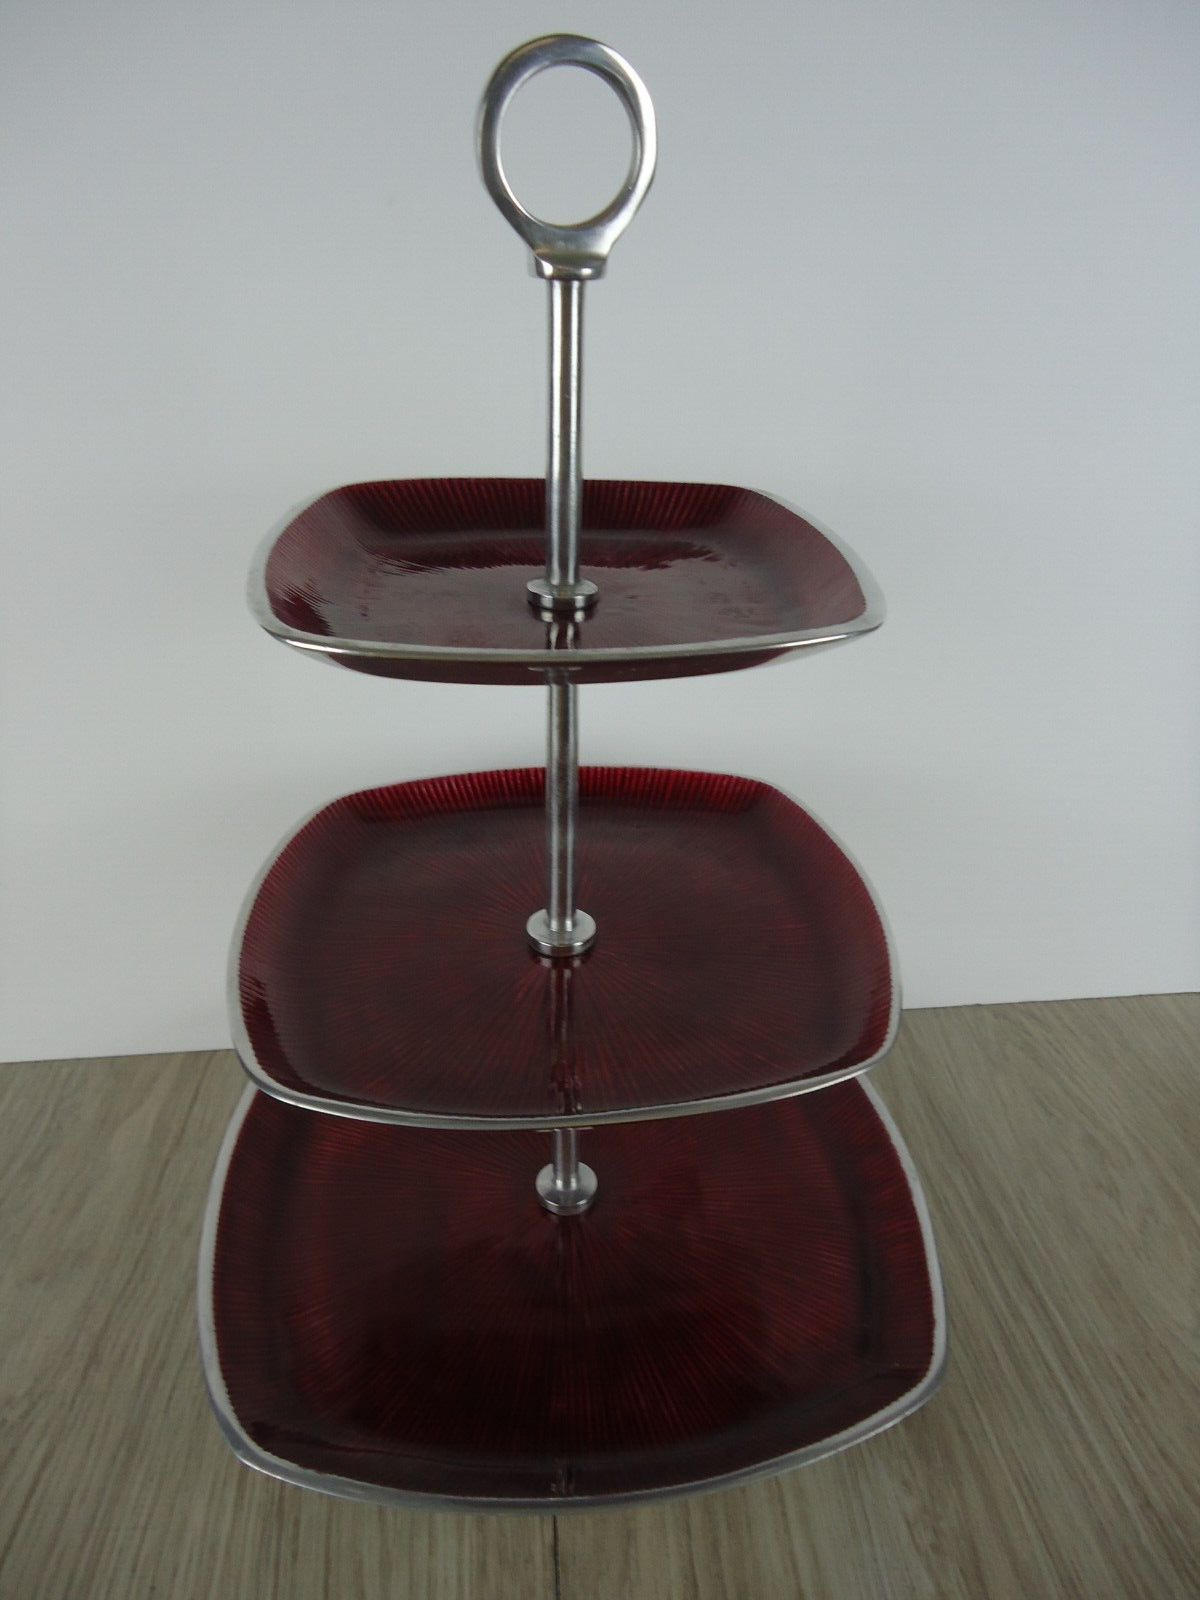 Simply Designz 3 Tiered Serving Tray Cake Stand Red Enamel on Silver Metal MCM